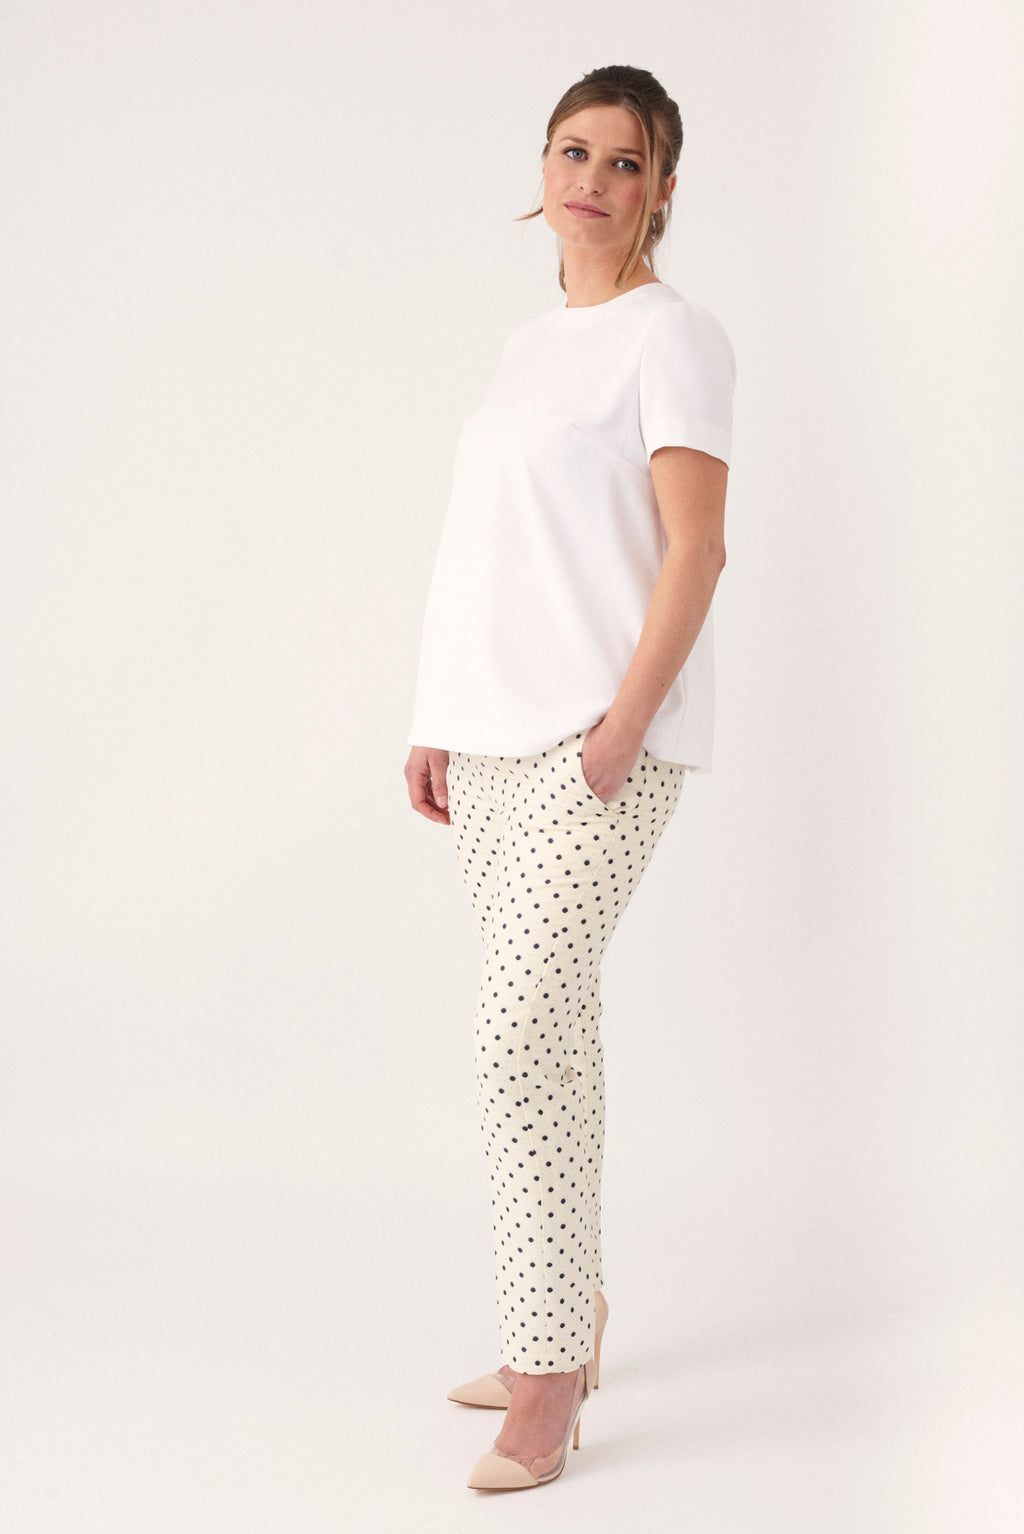 SALE  OFFERS  Chino Maternity Trousers in Lightweight Cotton  Attesa  Maternity